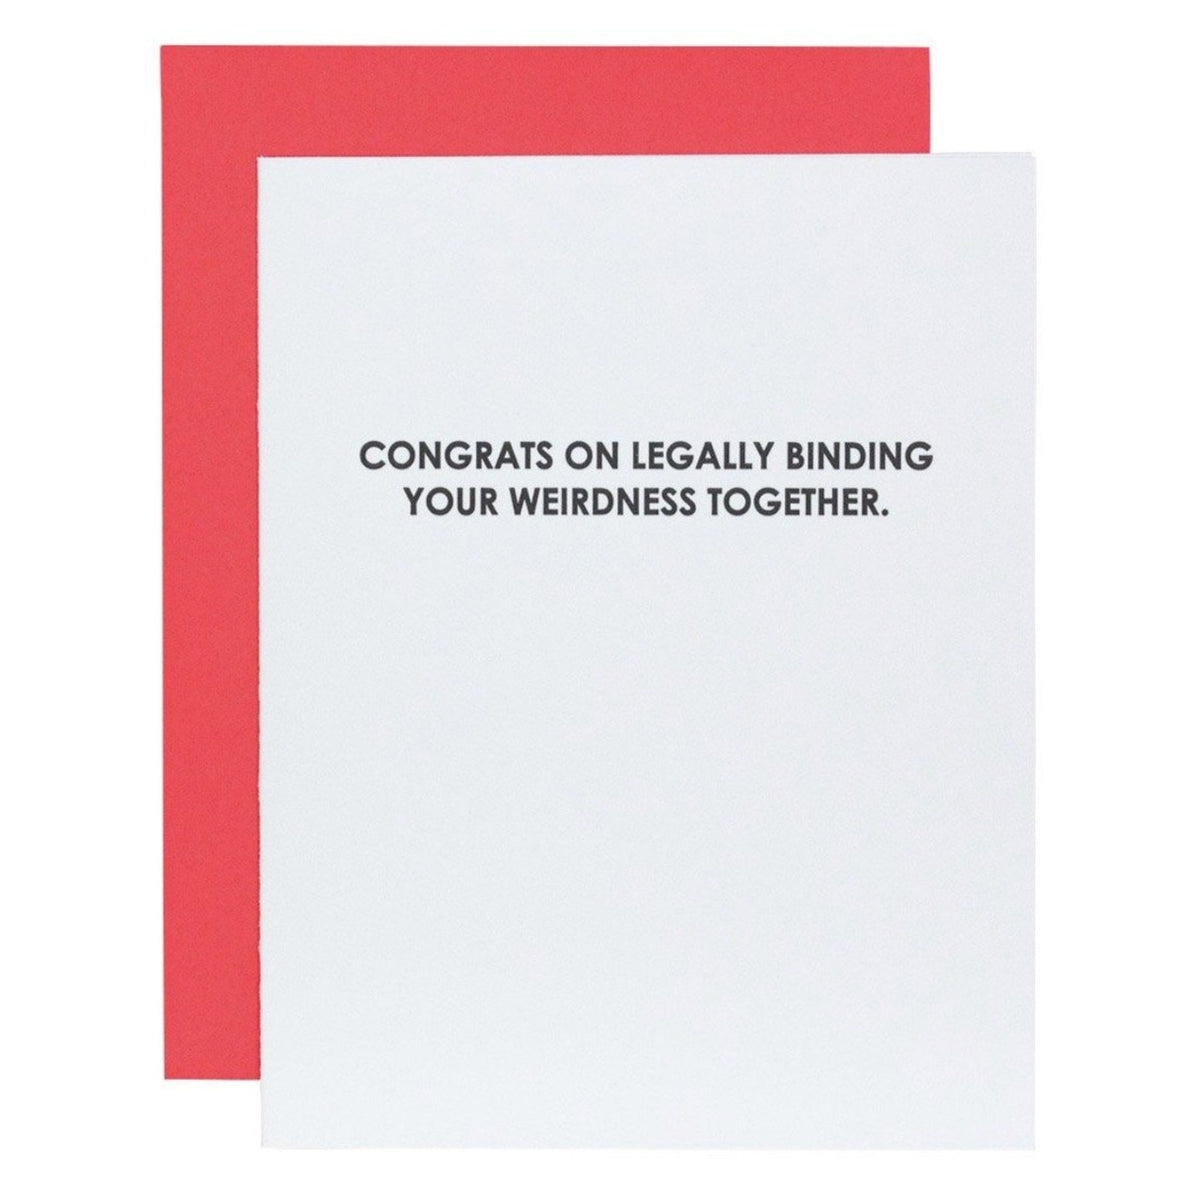 Congrats In Legally Binding Weirdness - Greeting Card